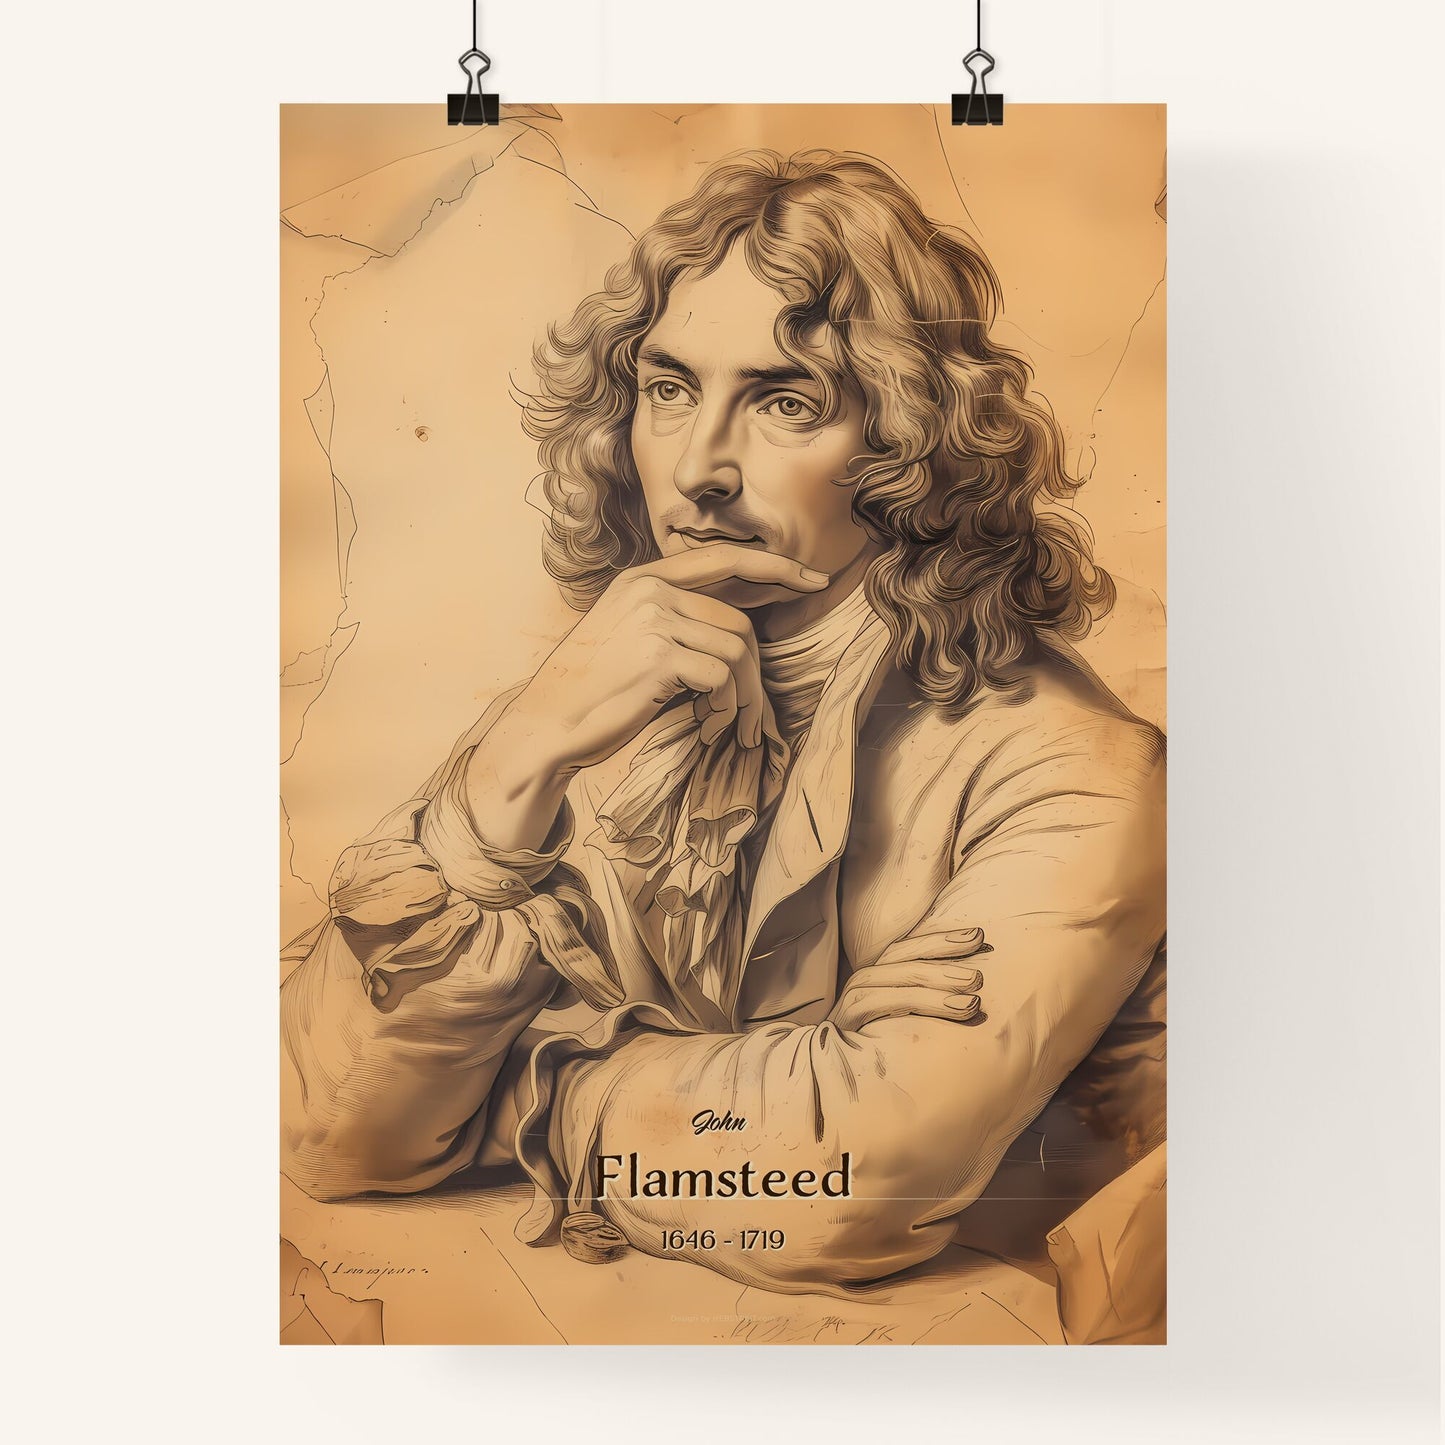 John, Flamsteed, 1646 - 1719, A Poster of a drawing of a man with his hand on his chin Default Title